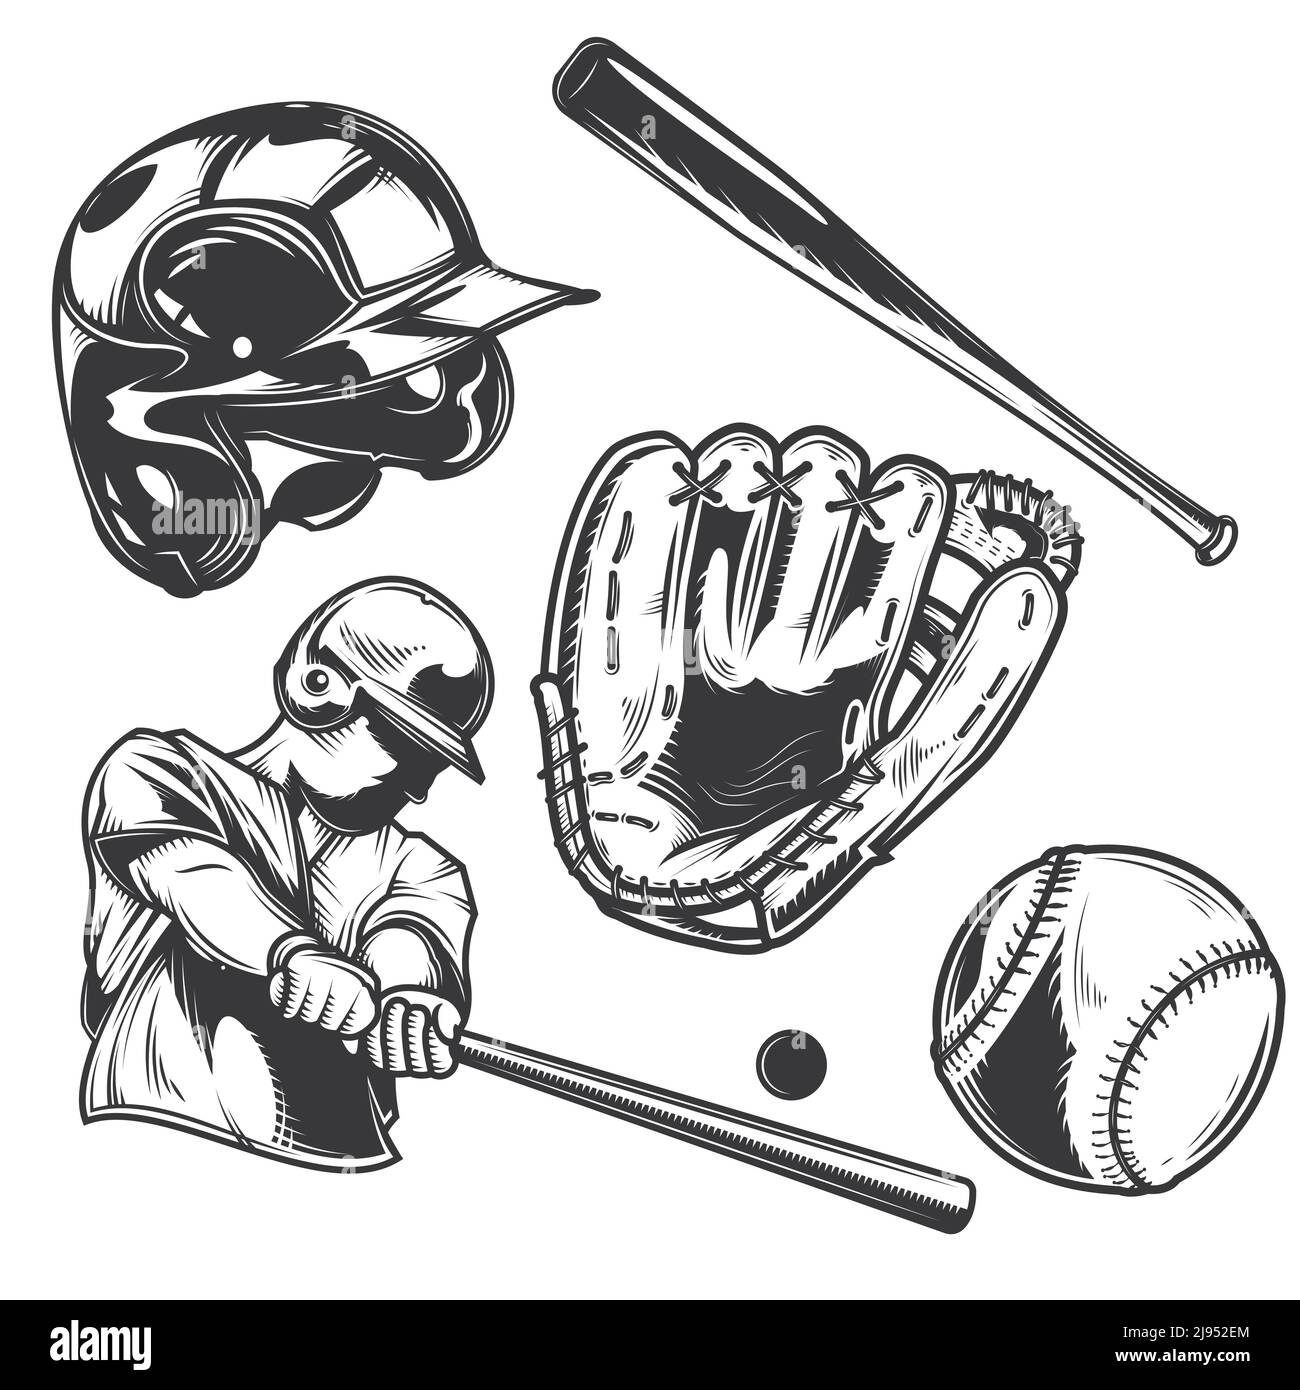 Set of baseball equipment (bat, ball, glove, helmet) and a player for creating your own badges, logos, labels, posters etc. Isolated on white. Stock Vector